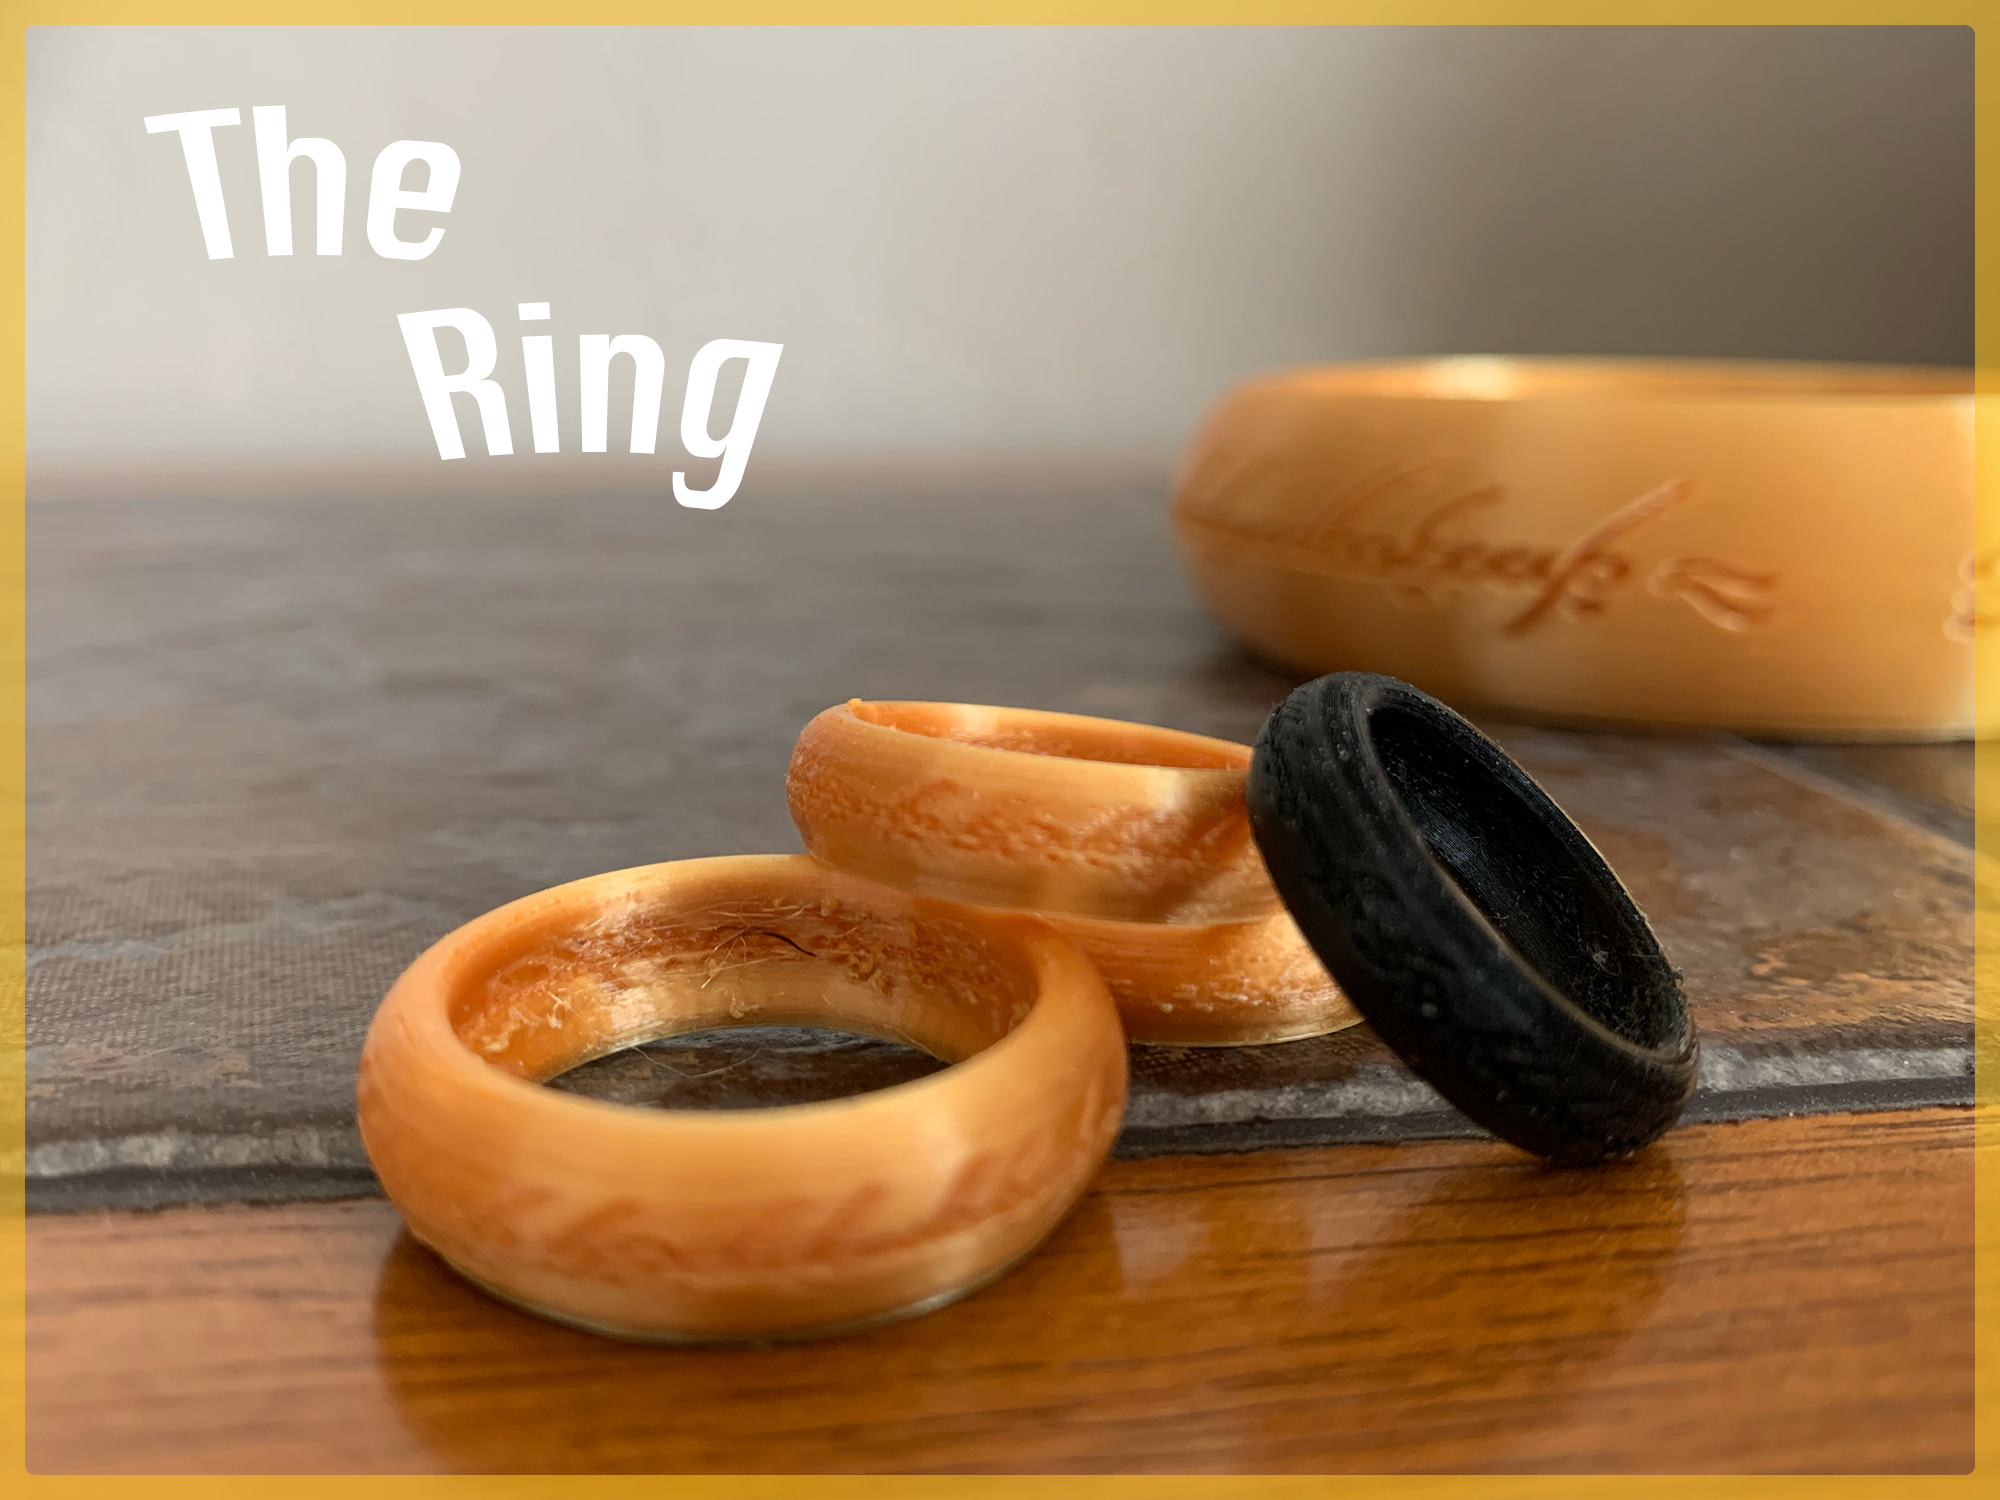 Sauron's Ring - Lord Of The Rings